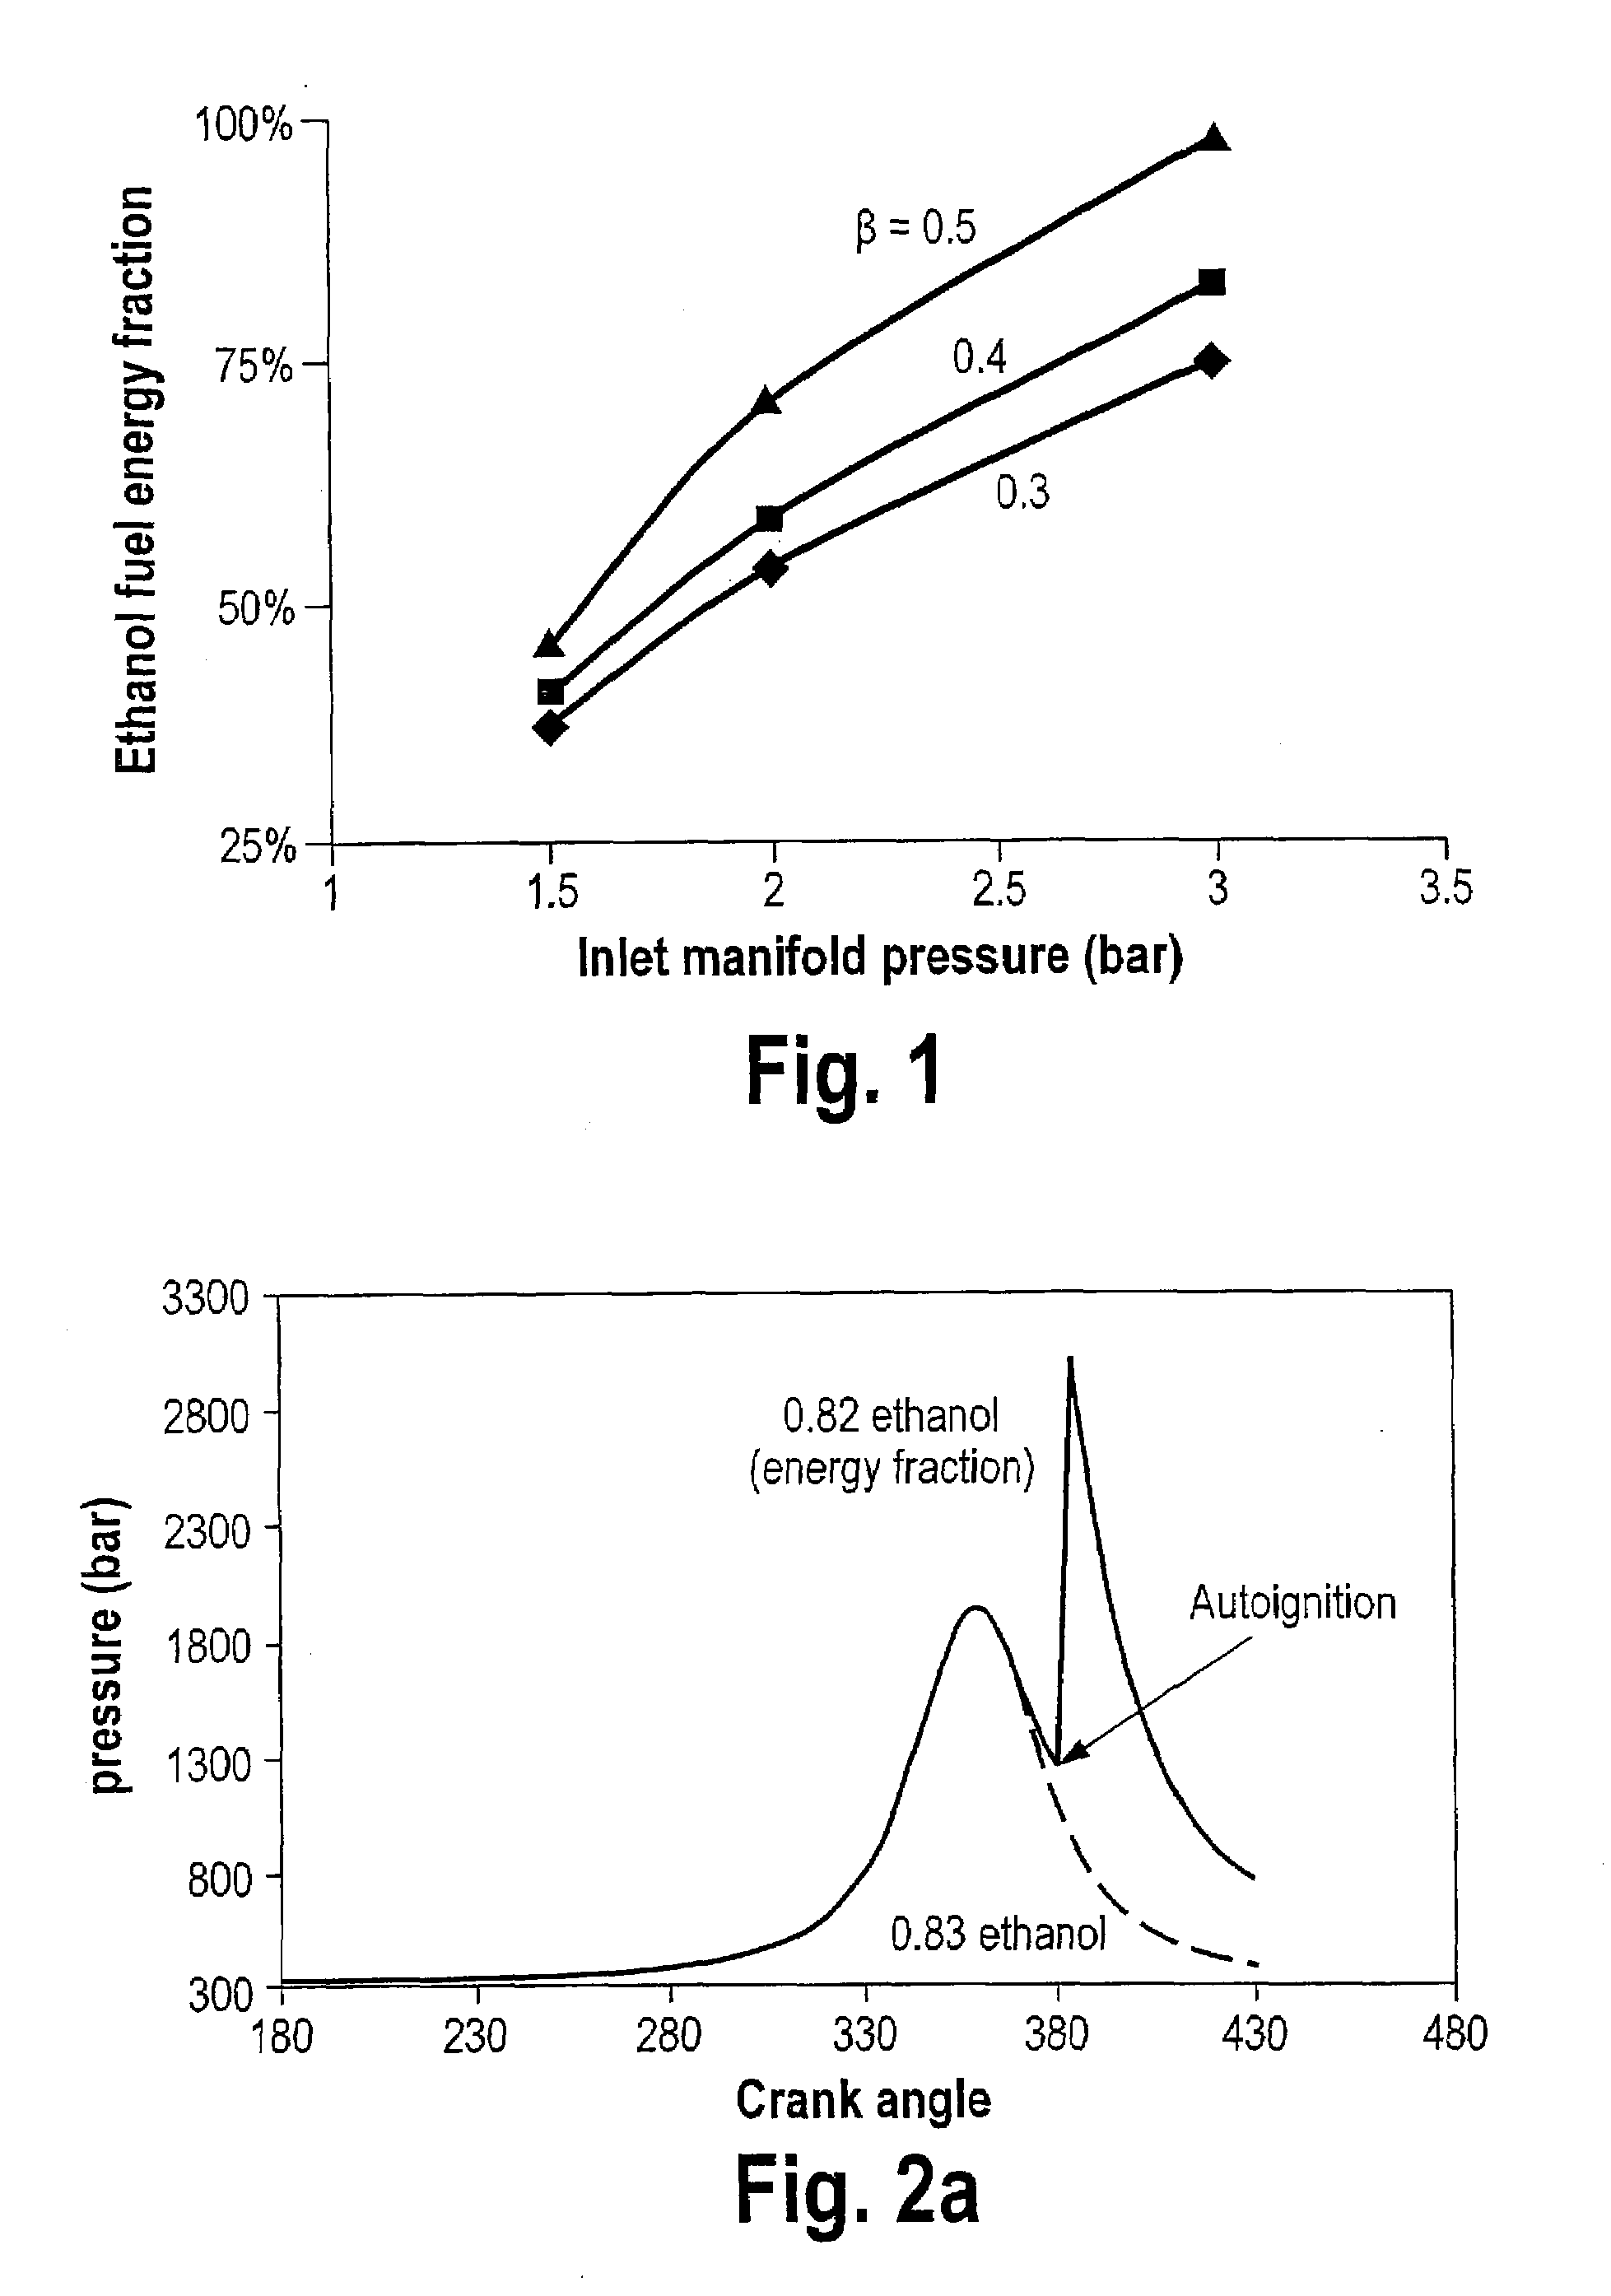 Optimized Fuel Management System for Direct Injection Ethanol Enhancement of Gasoline Engines